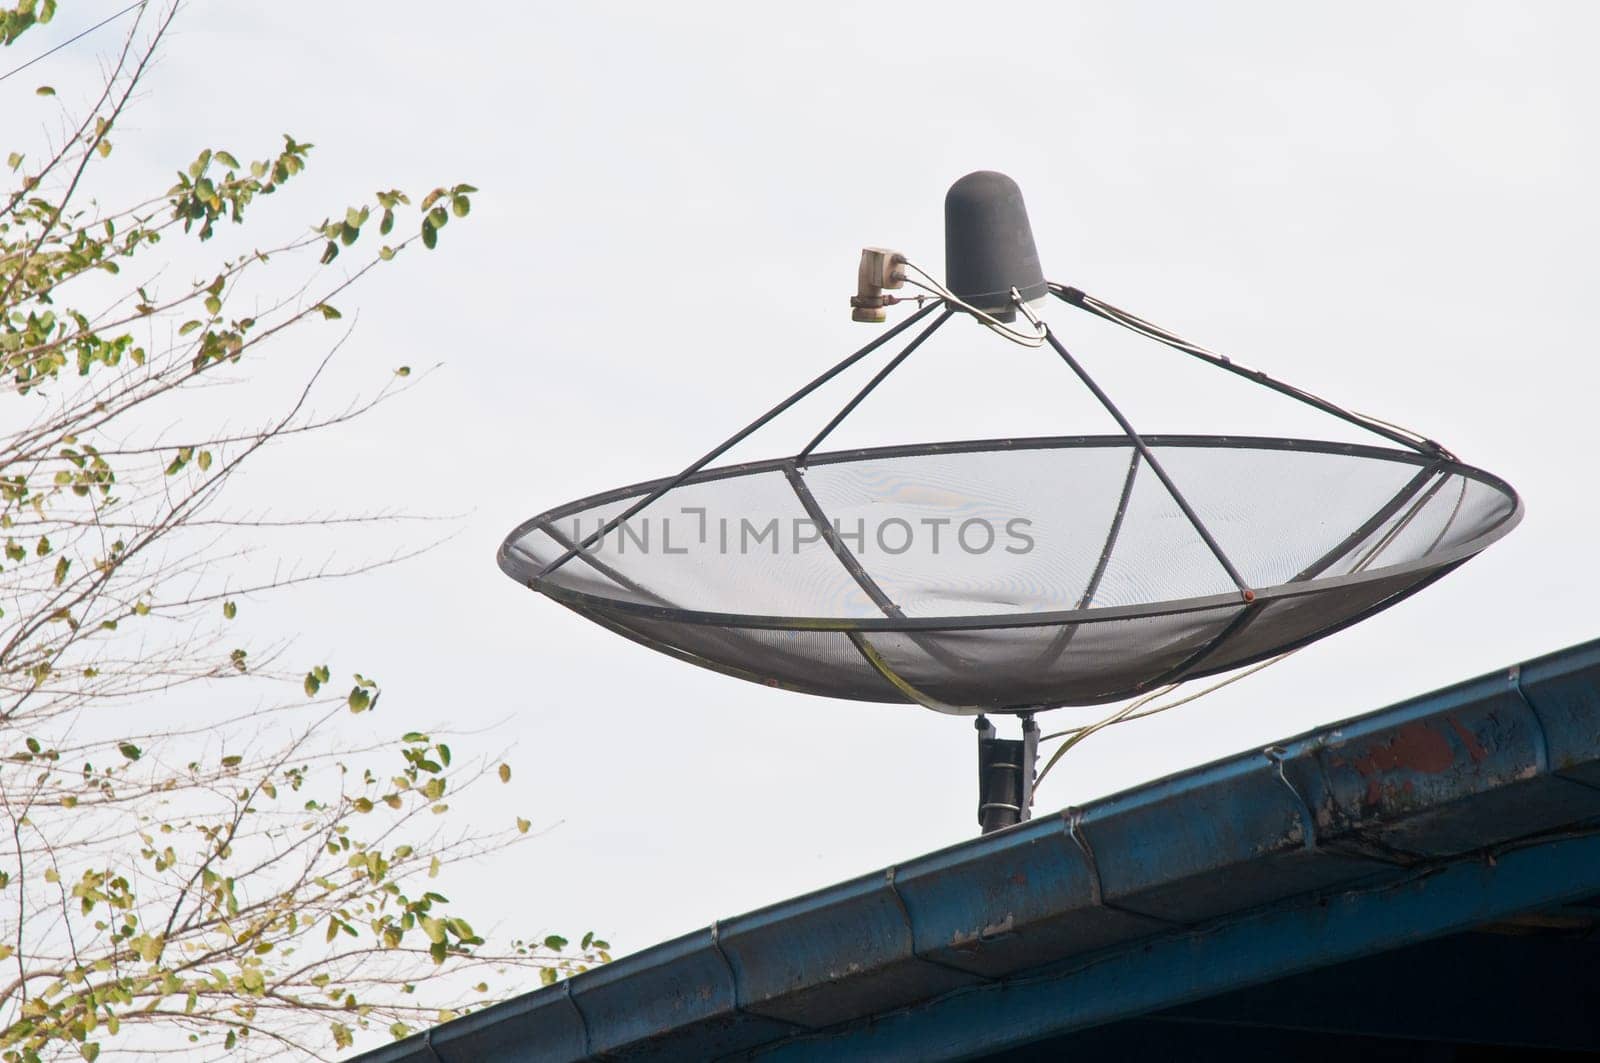 Modern satellite dish on the roof top with tree leaves branch